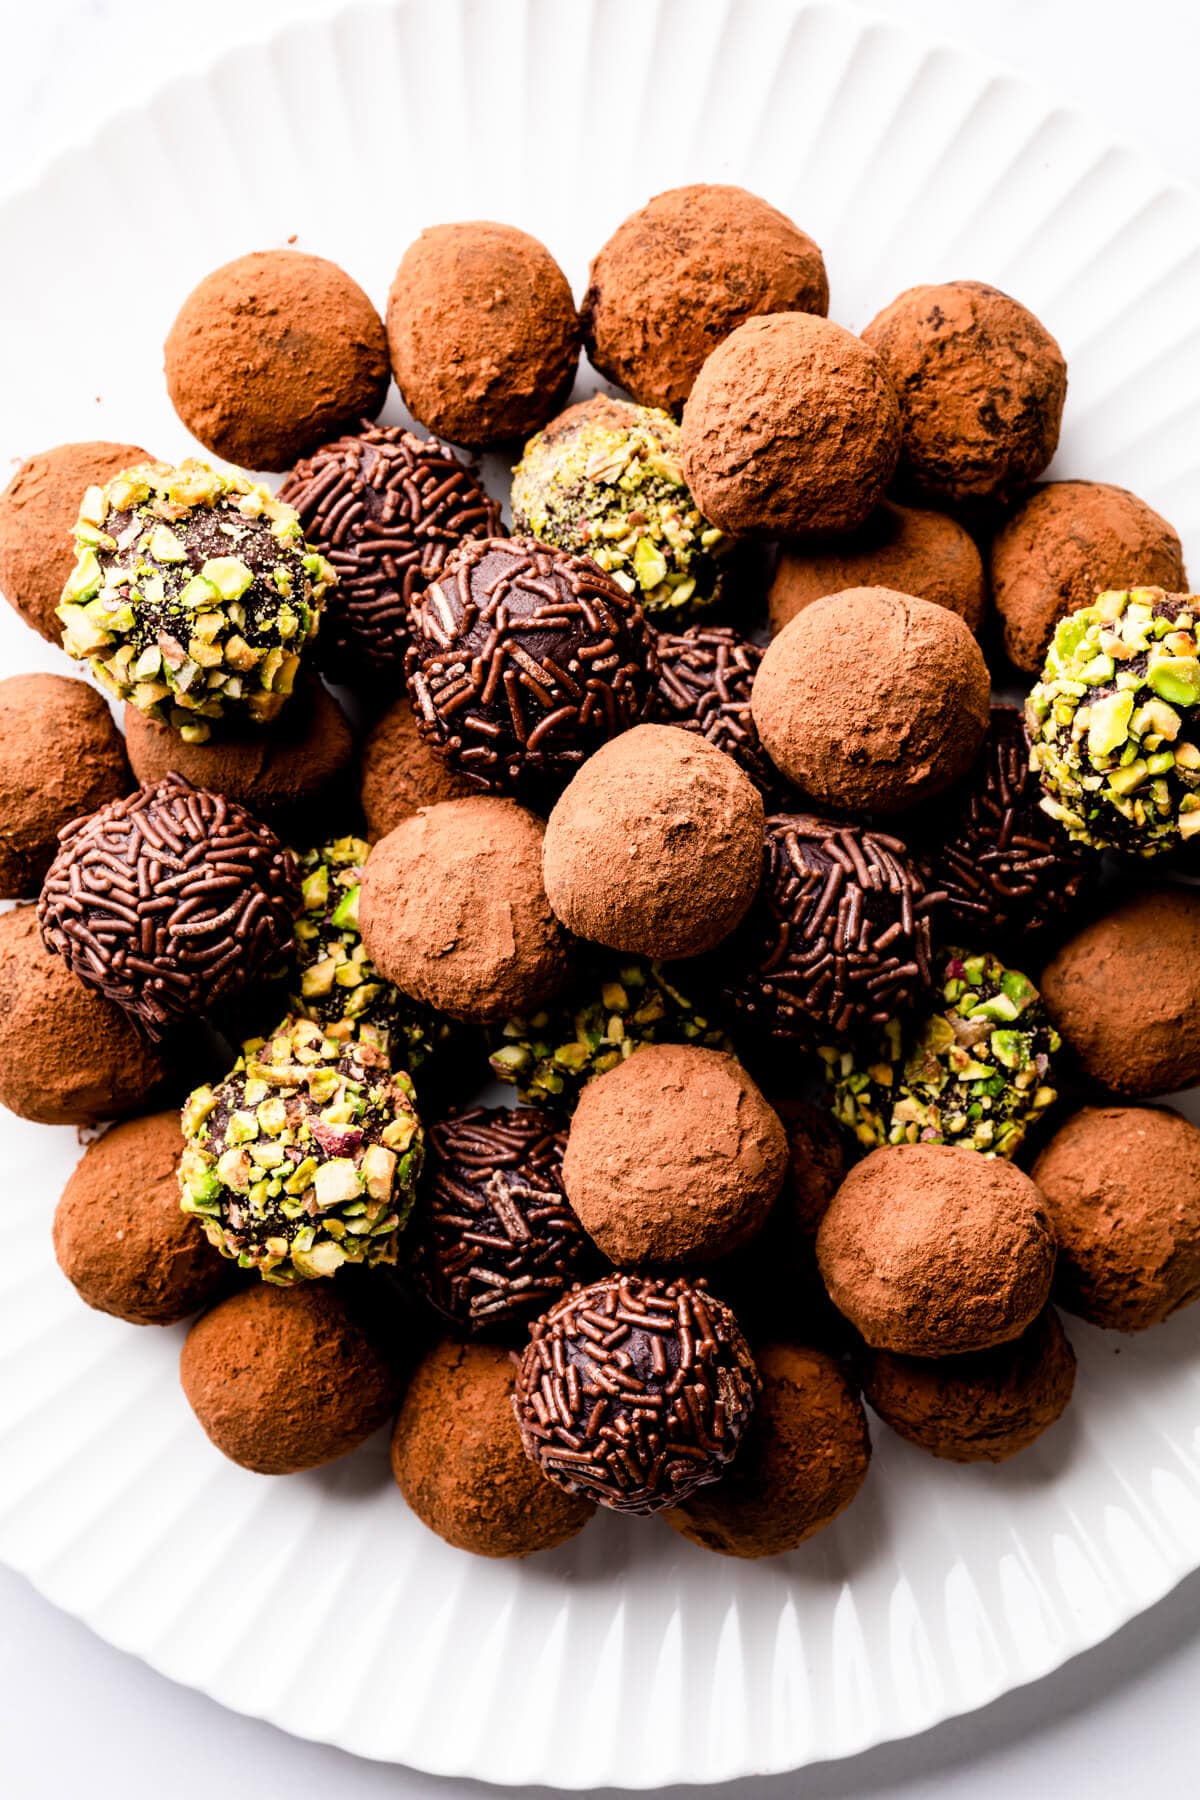 a pile of chocolate truffles on a white plate.